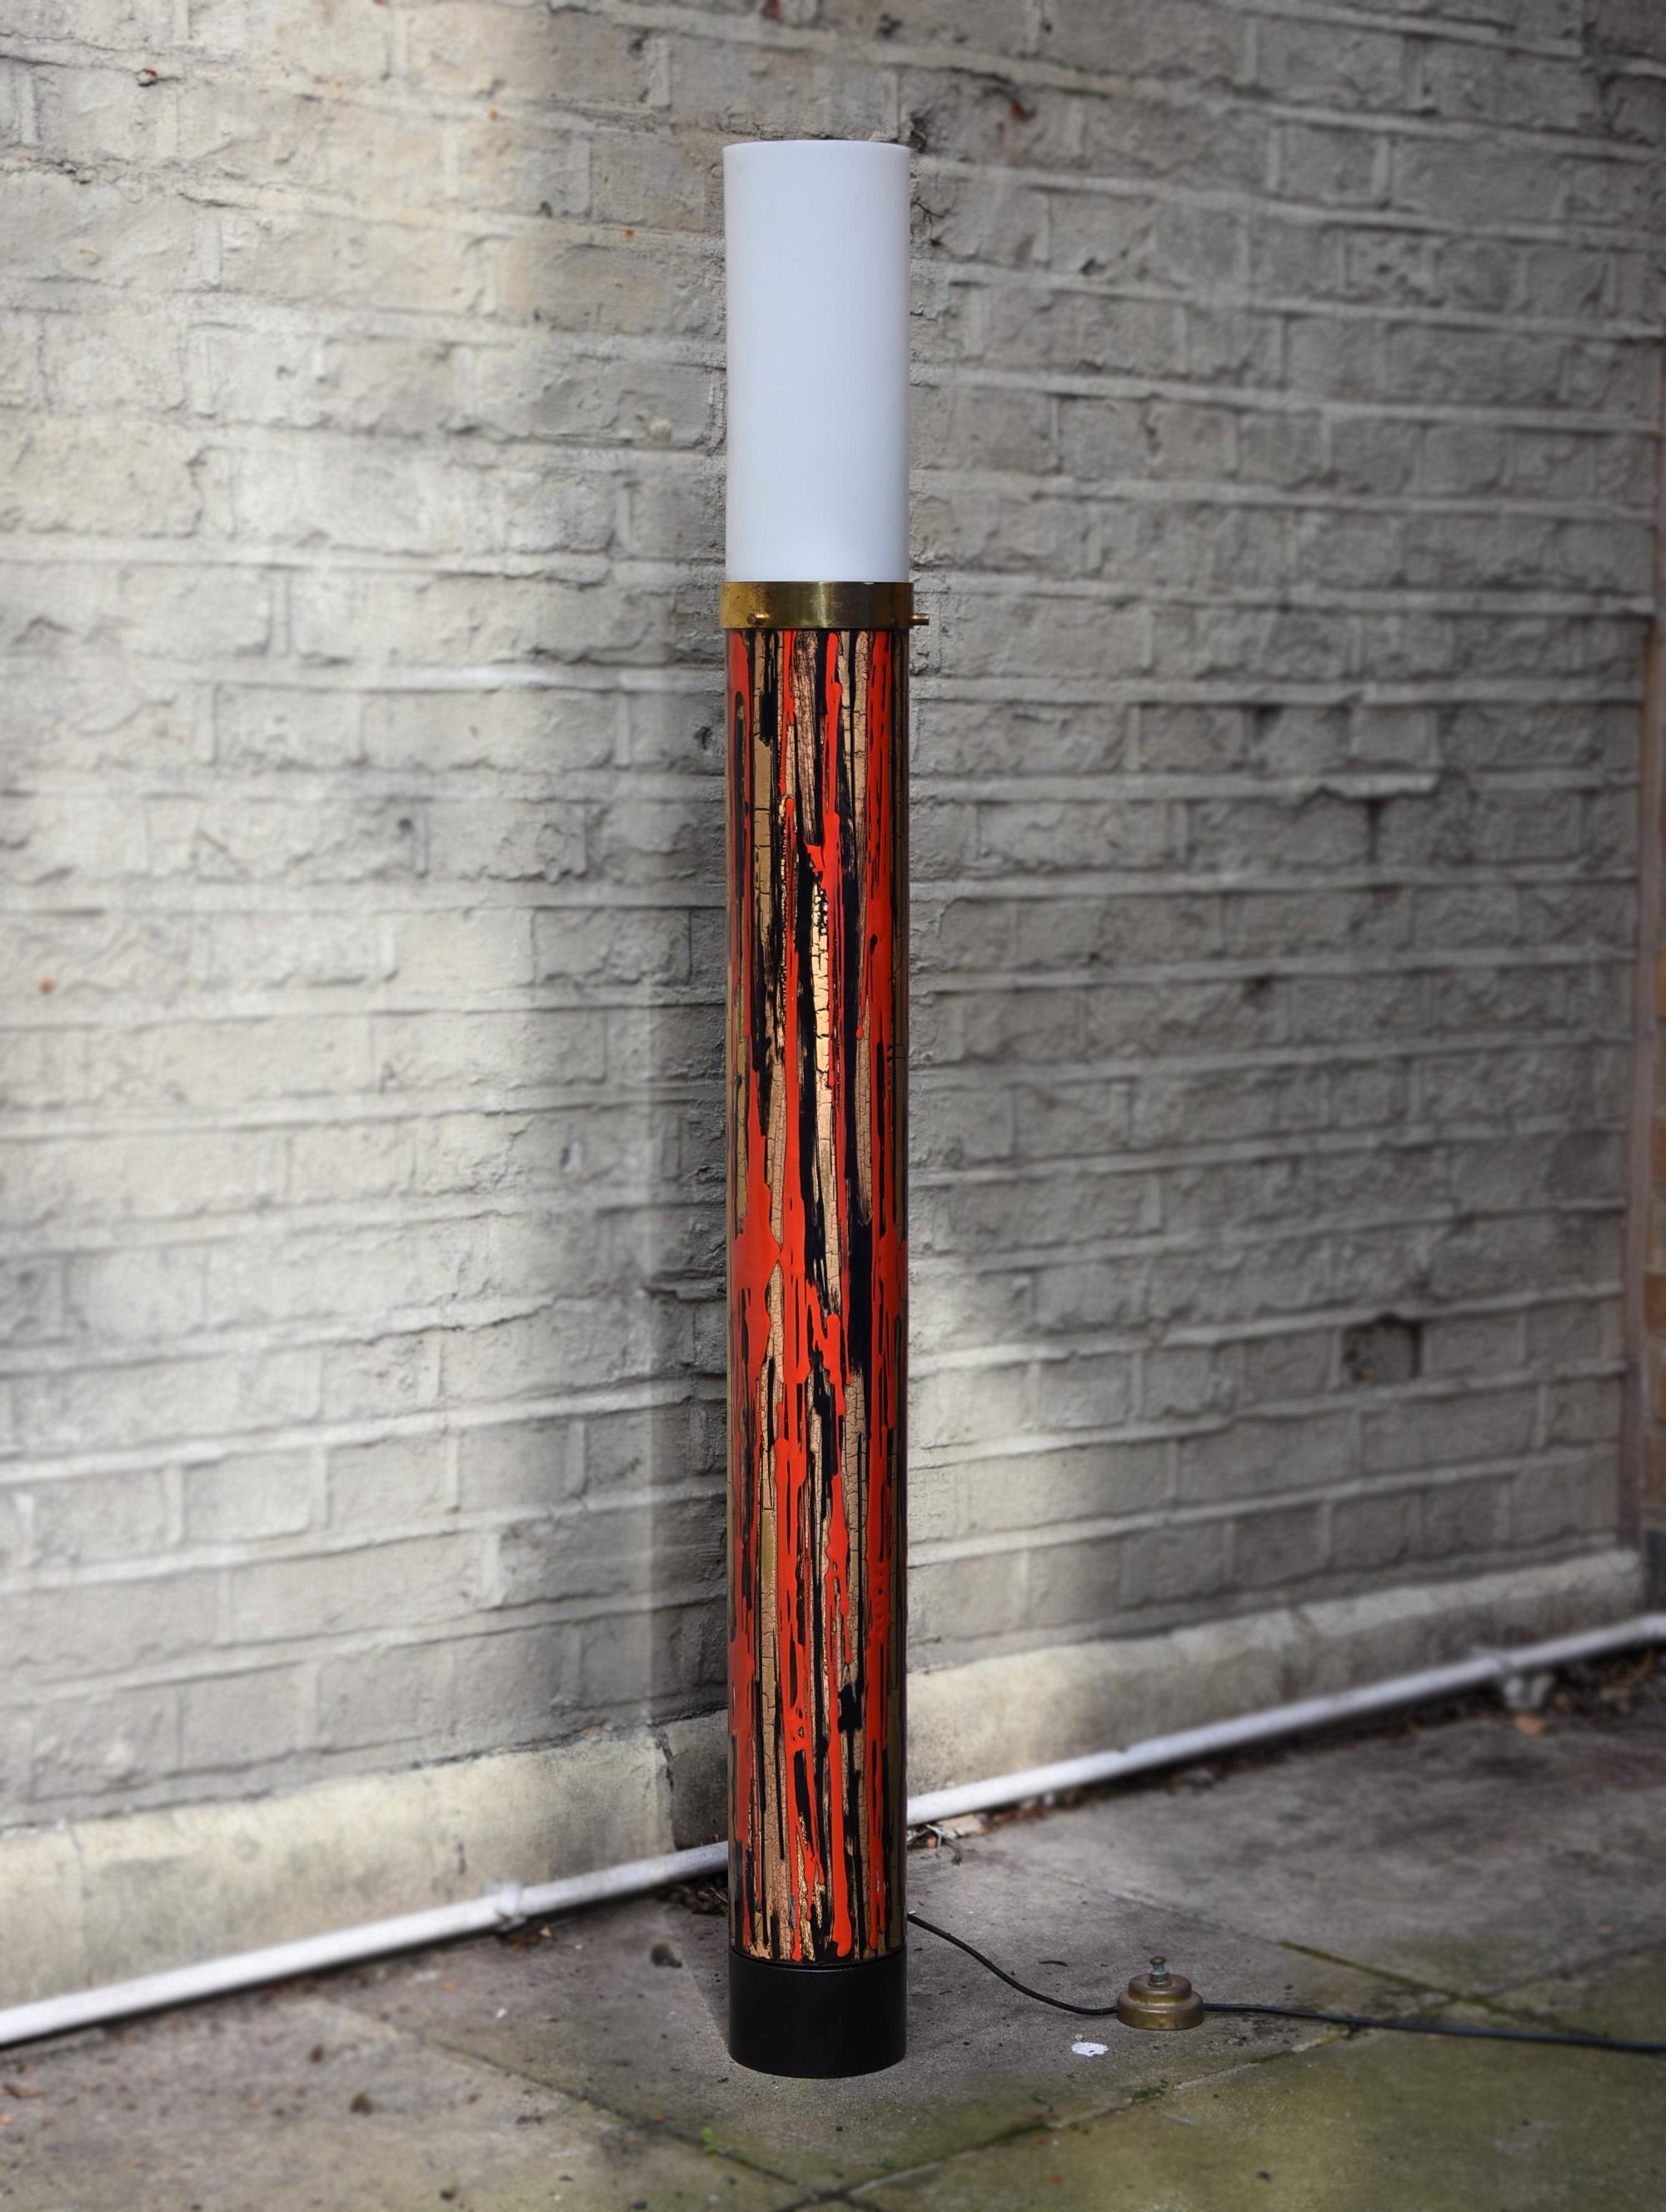 Midcentury Modernist Floor Lamp Art Enamel on Metal Acrylic Shade, Angelo Brotto In Good Condition For Sale In London, GB